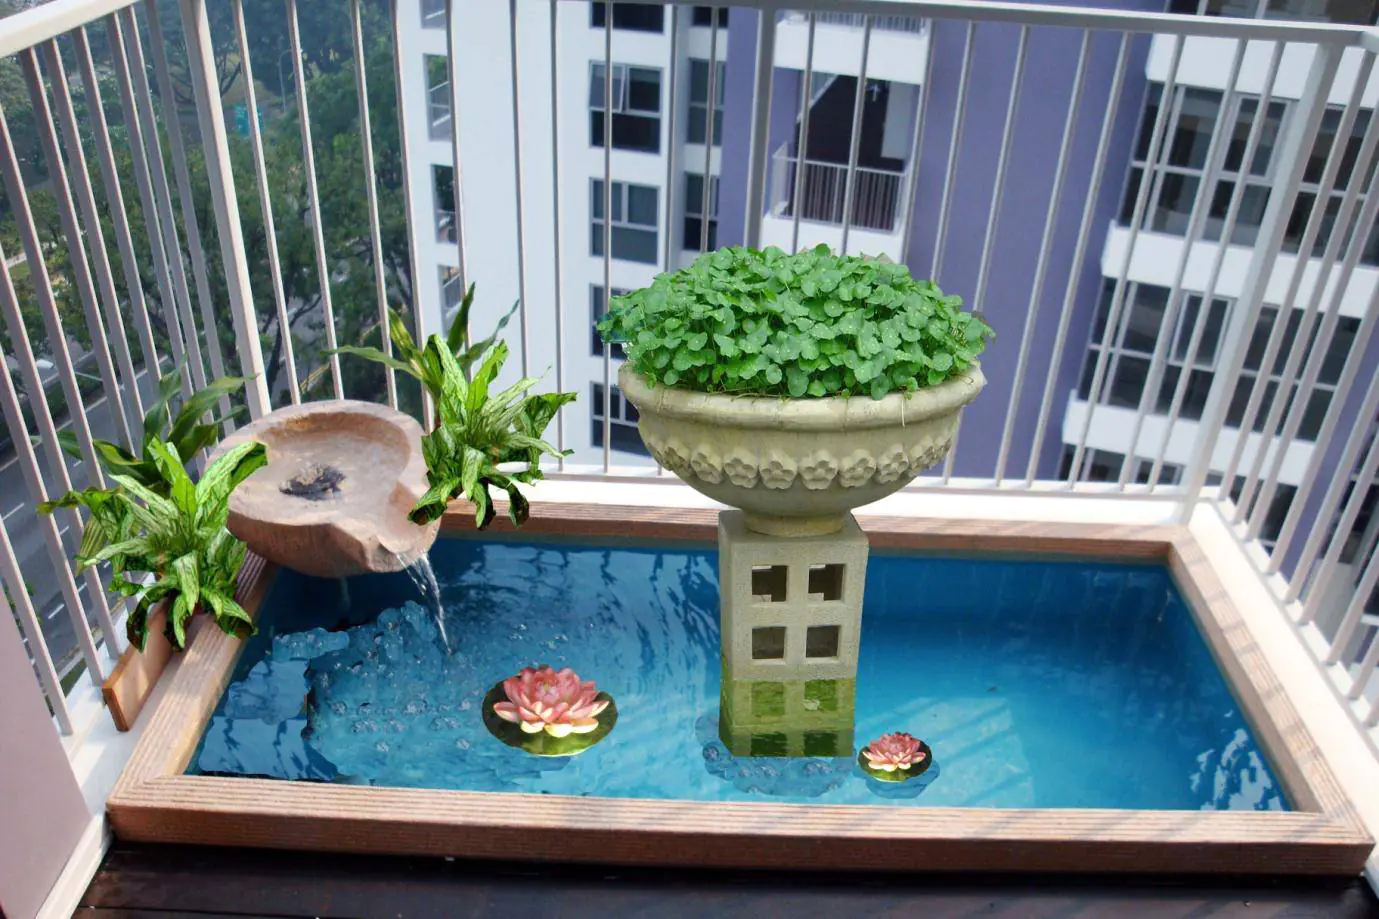 Bể cá Koi ban công chung cư - In 2024, Koi fish tanks have become a popular addition to high-rise apartment balconies. A Koi fish tank not only brings peace and serenity to your home, but it is also a perfect way to showcase your love for these stunning creatures. With specially designed Koi fish tanks for apartment balconies, anyone can enjoy the beauty of Koi fish from the comfort of their own home.